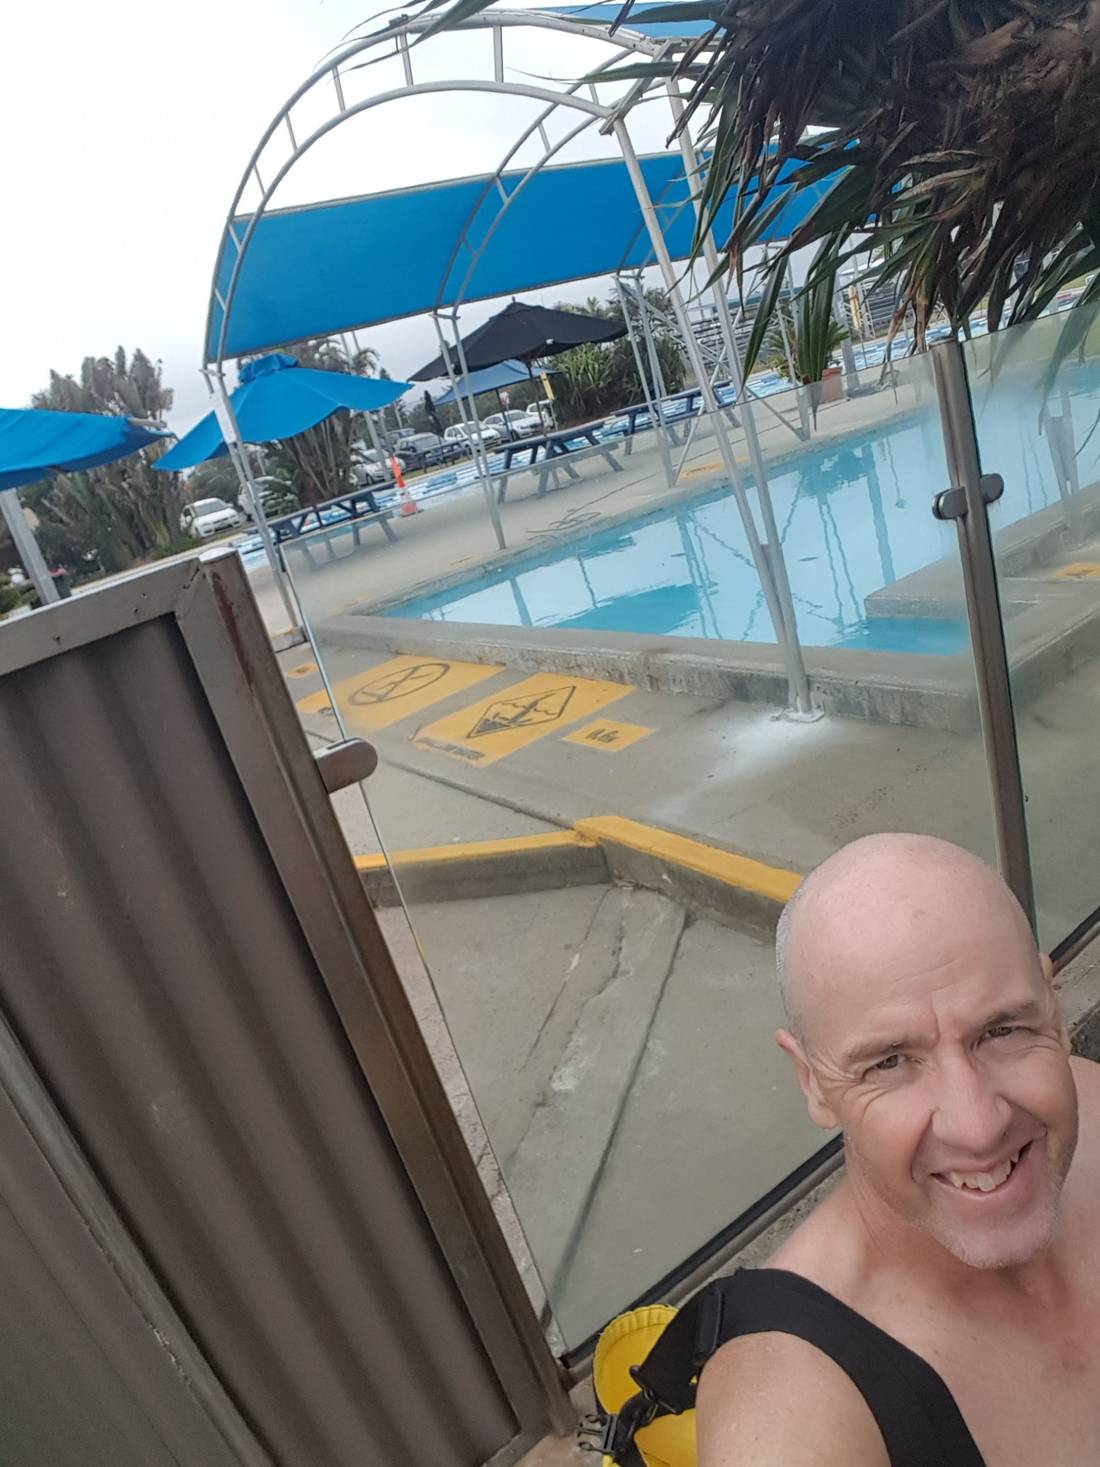 I got back just in time for beach side pool to open and I had a hour left of free car parking so I did 2 kilometers of laps in the pool.